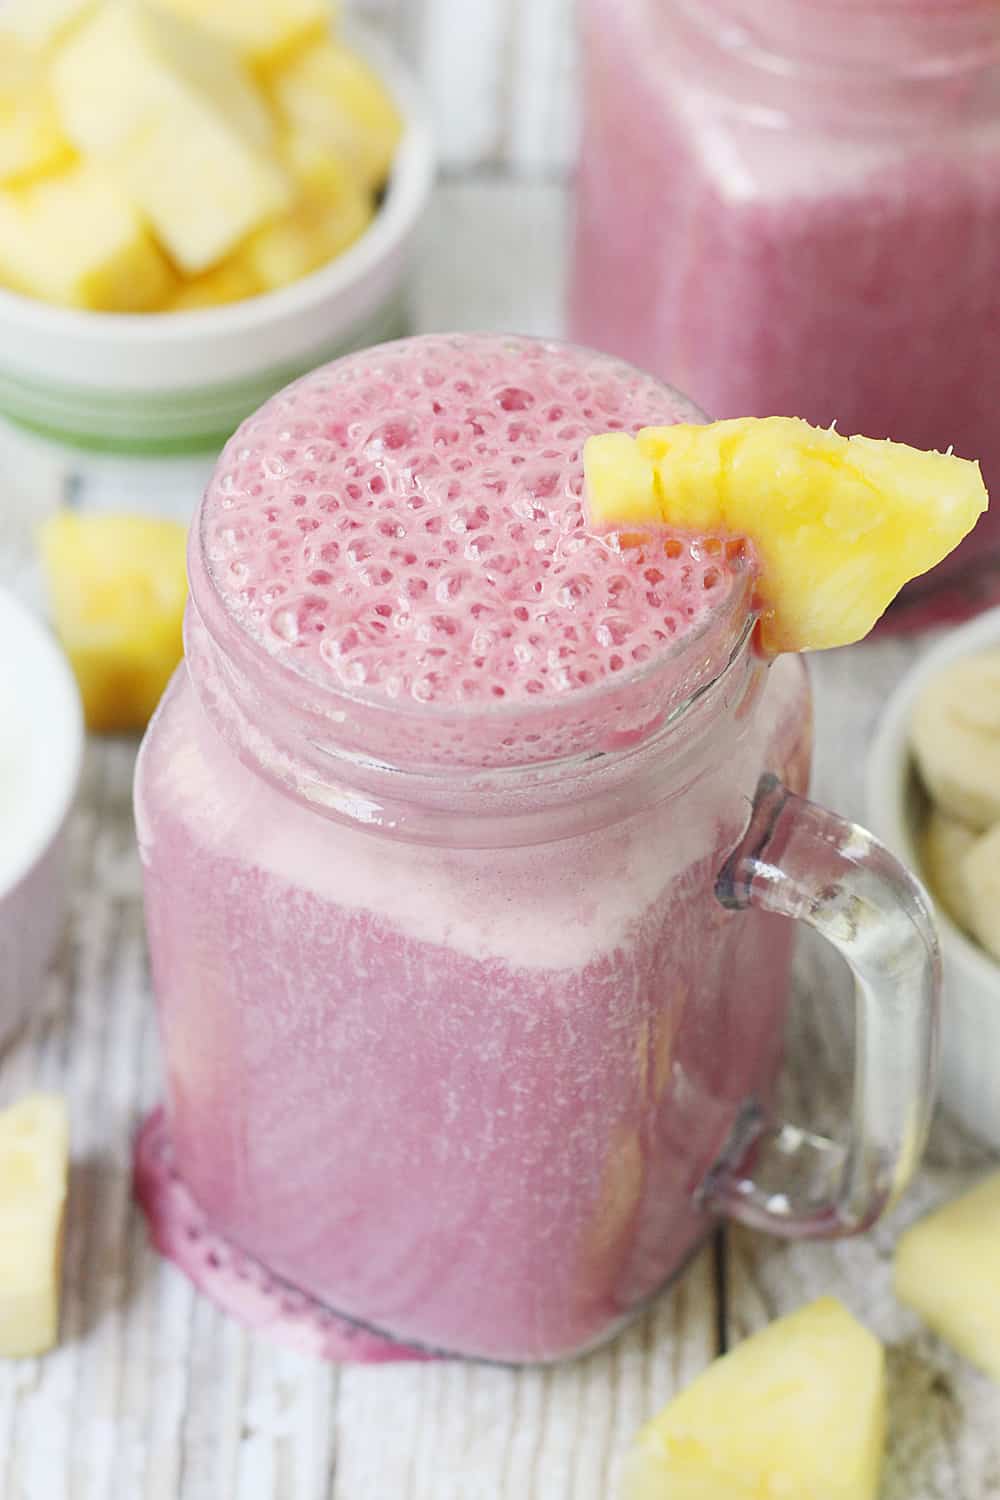 4-Ingredient Pineapple Cranberry Smoothie -- Cranberry lovers will enjoy this 4-ingredient pineapple cranberry smoothie! It features all-natural cranberry juice, frozen pineapple and banana, and Greek yogurt for a tart, good-for-you smoothie!